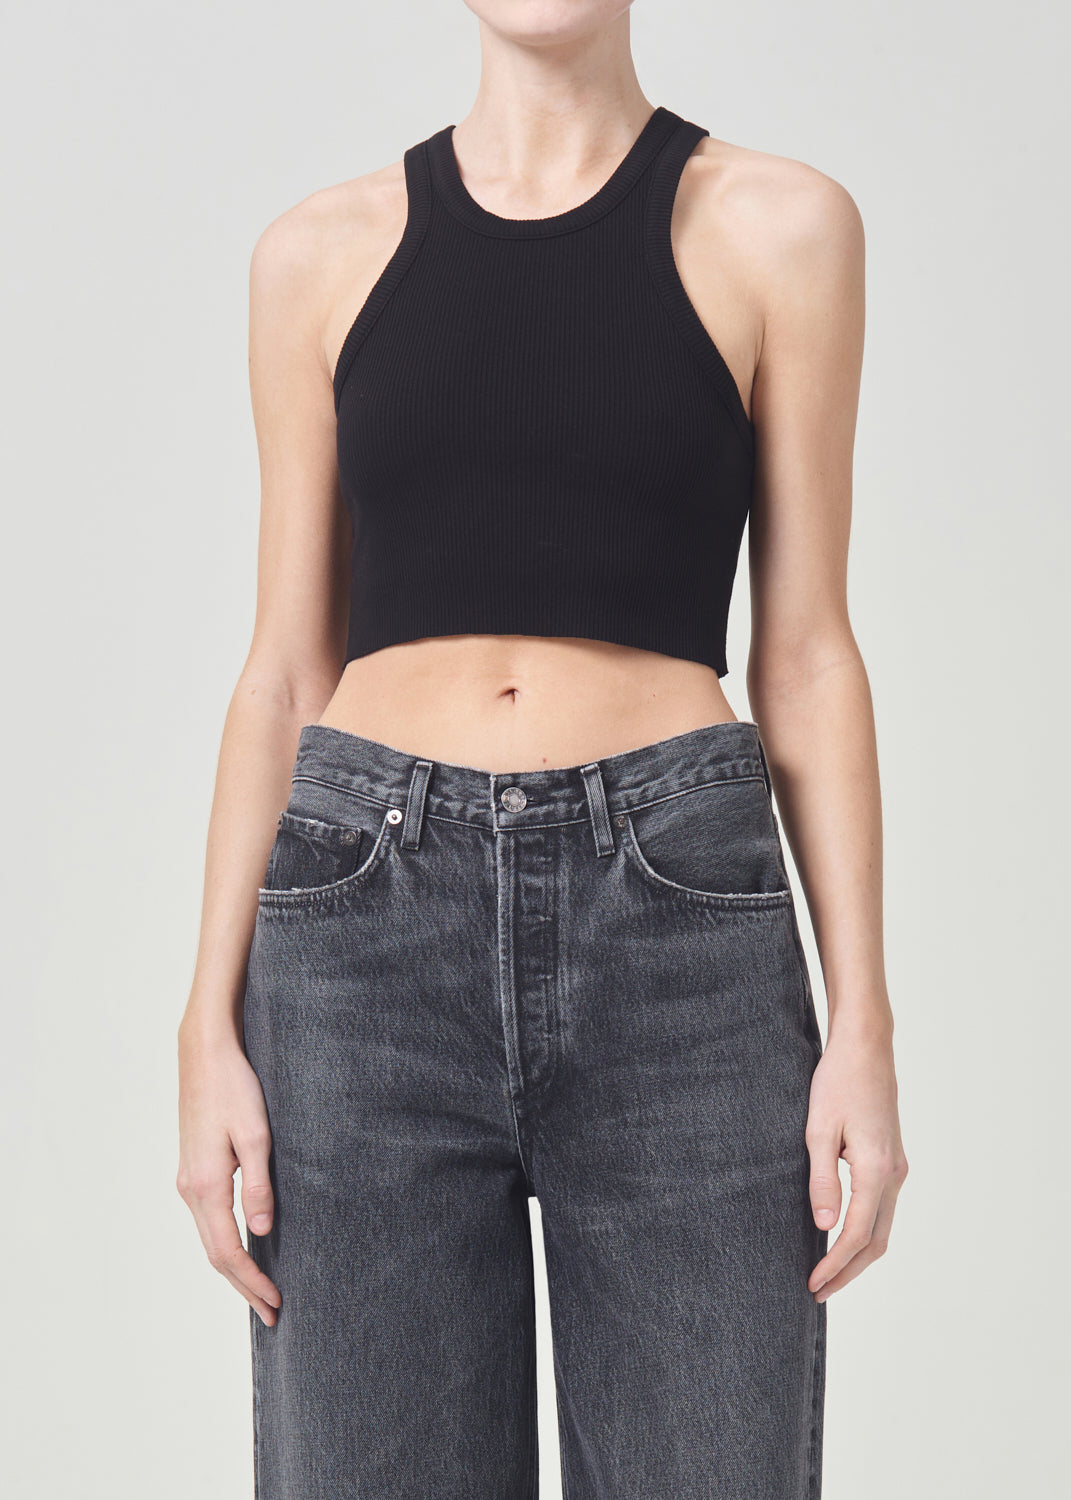 Cropped Bailey Tank in Black front